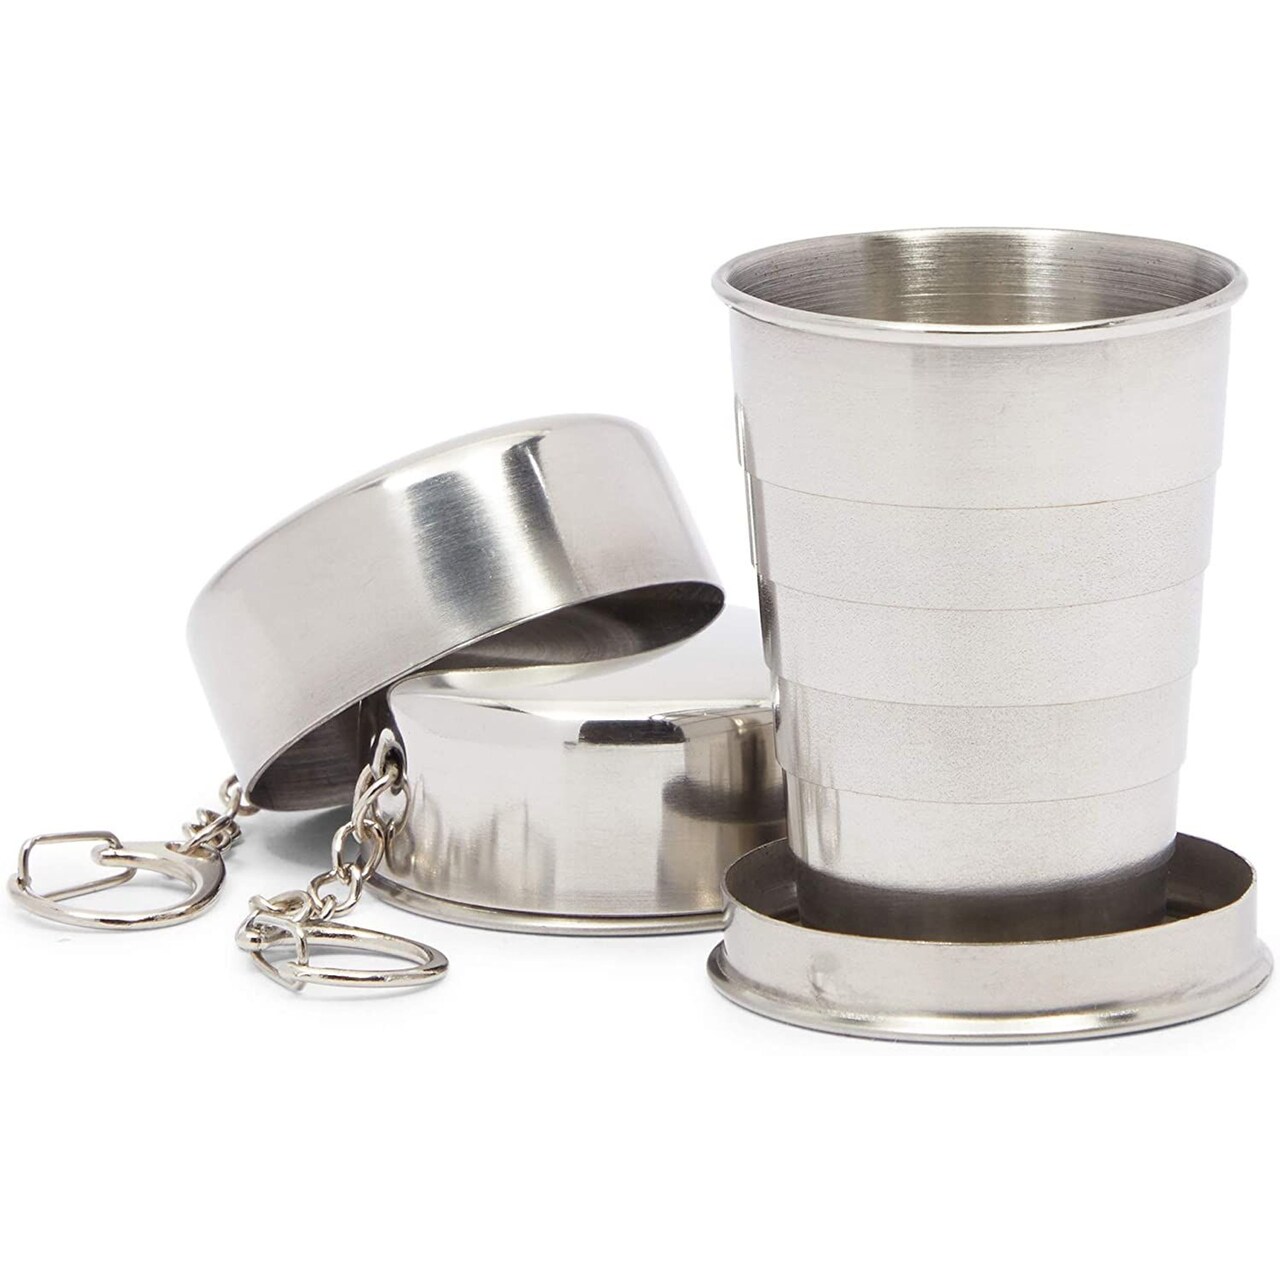 Stainless Steel Collapsible Shot Glasses for Camping, Travel (2.3oz, 2  Pack)